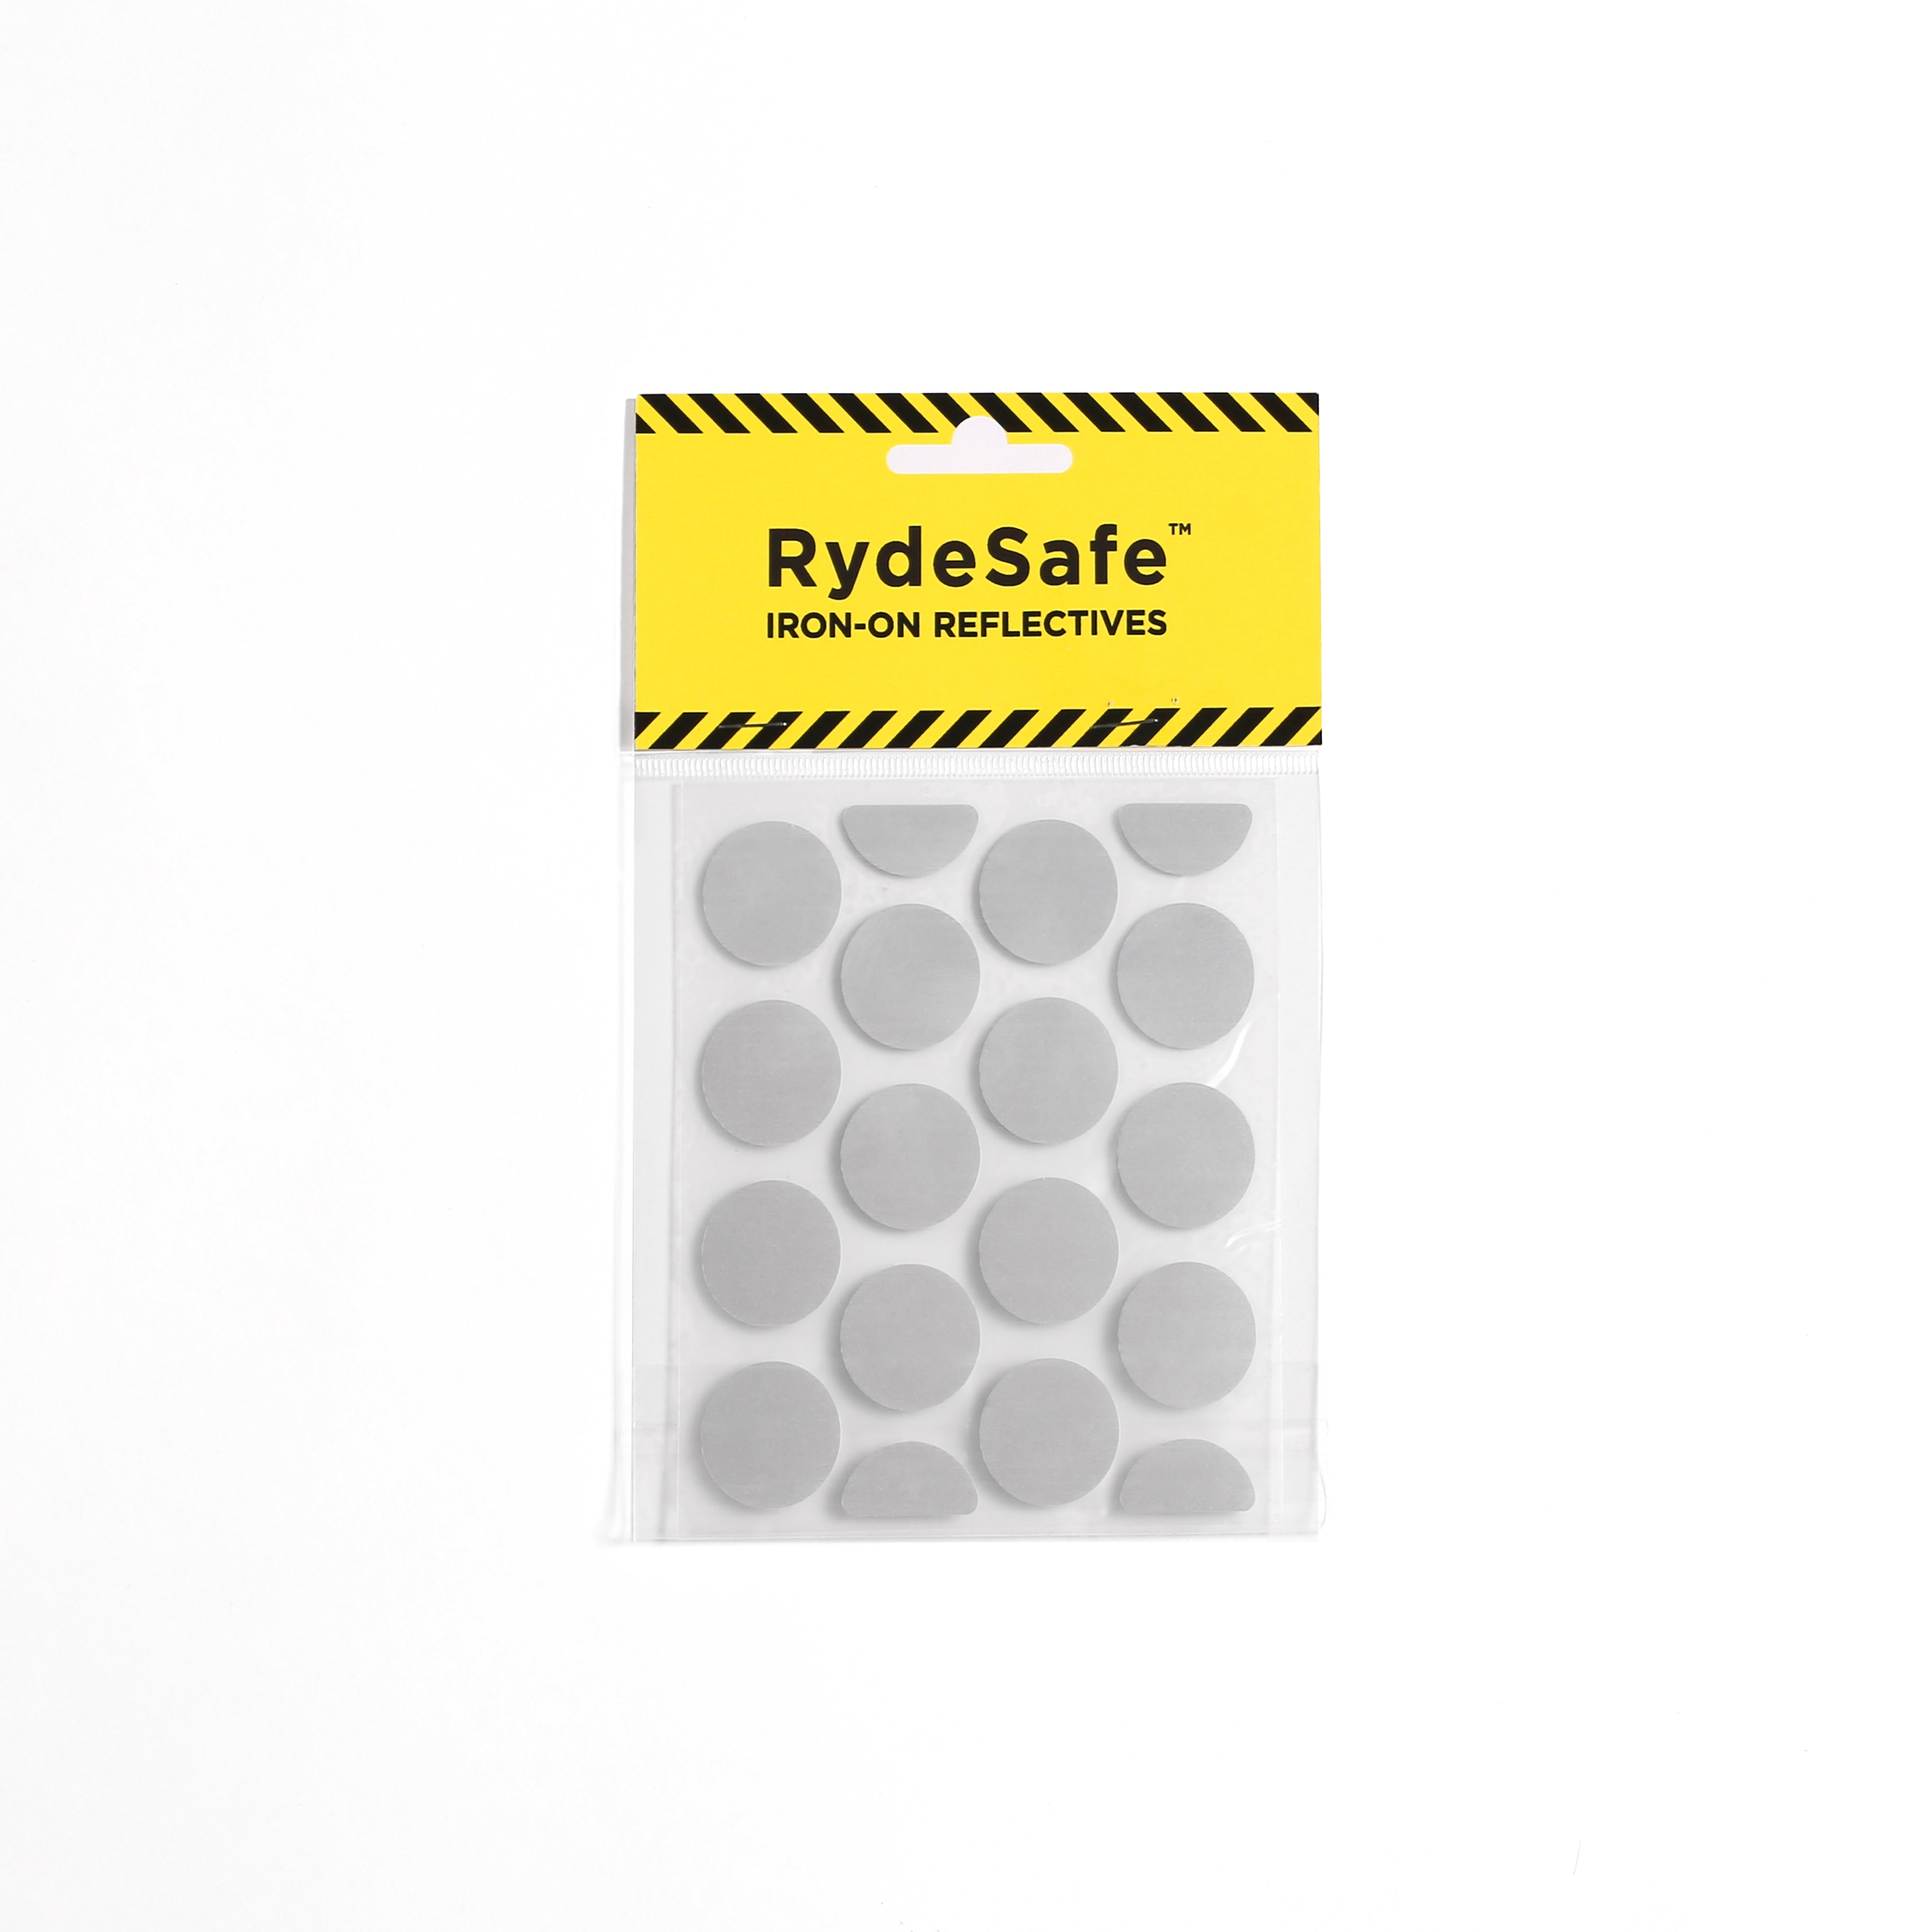 RydeSafe Iron-On Reflectives - LARGE - Dots & Tabs - Made with 3M Heat